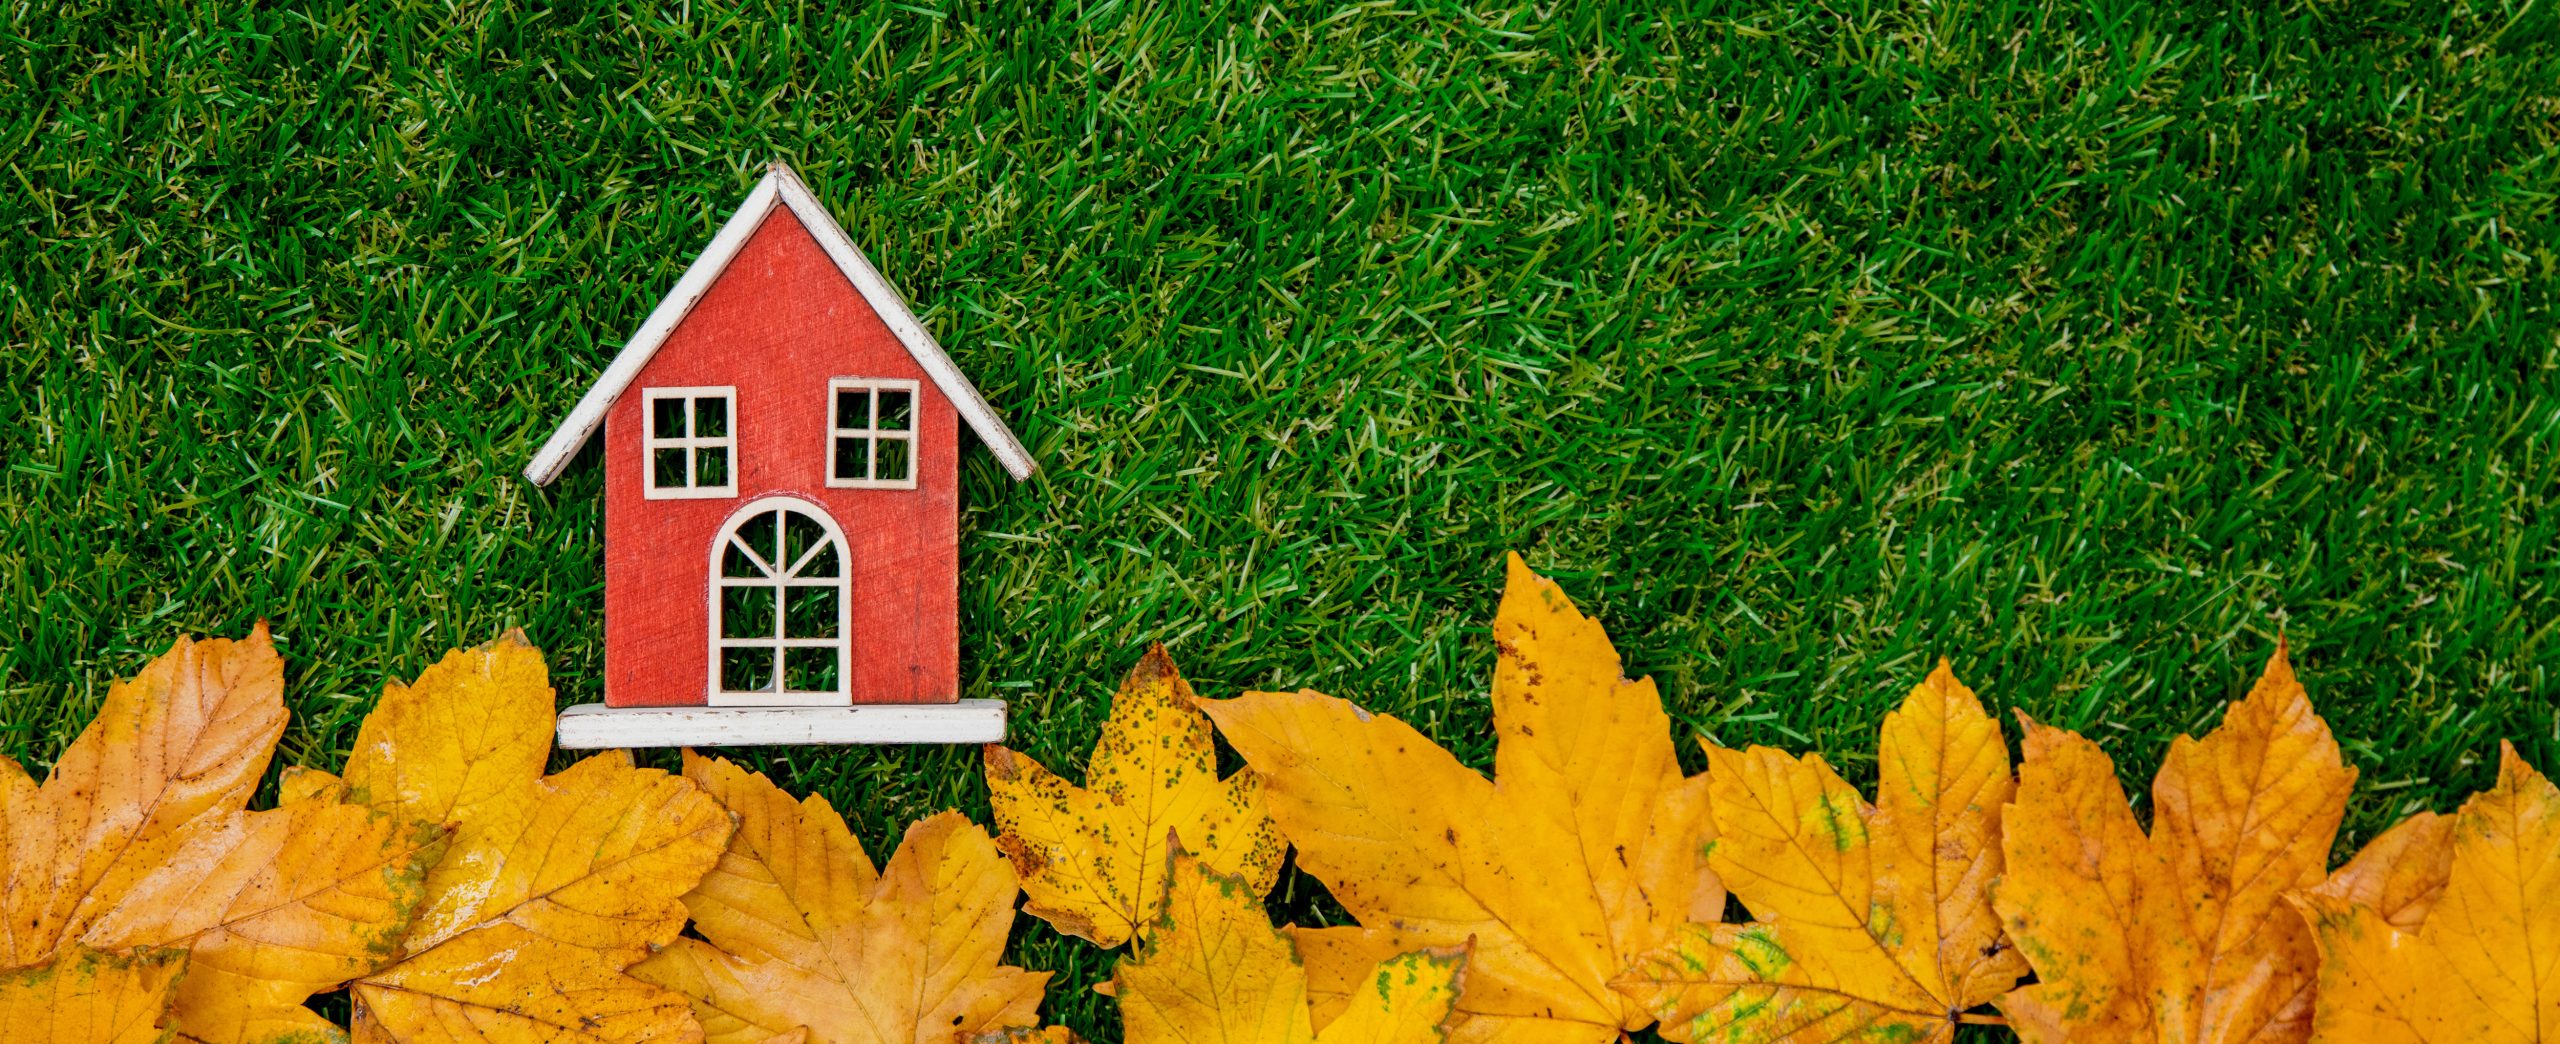 Autumn is the golden season to sell your property